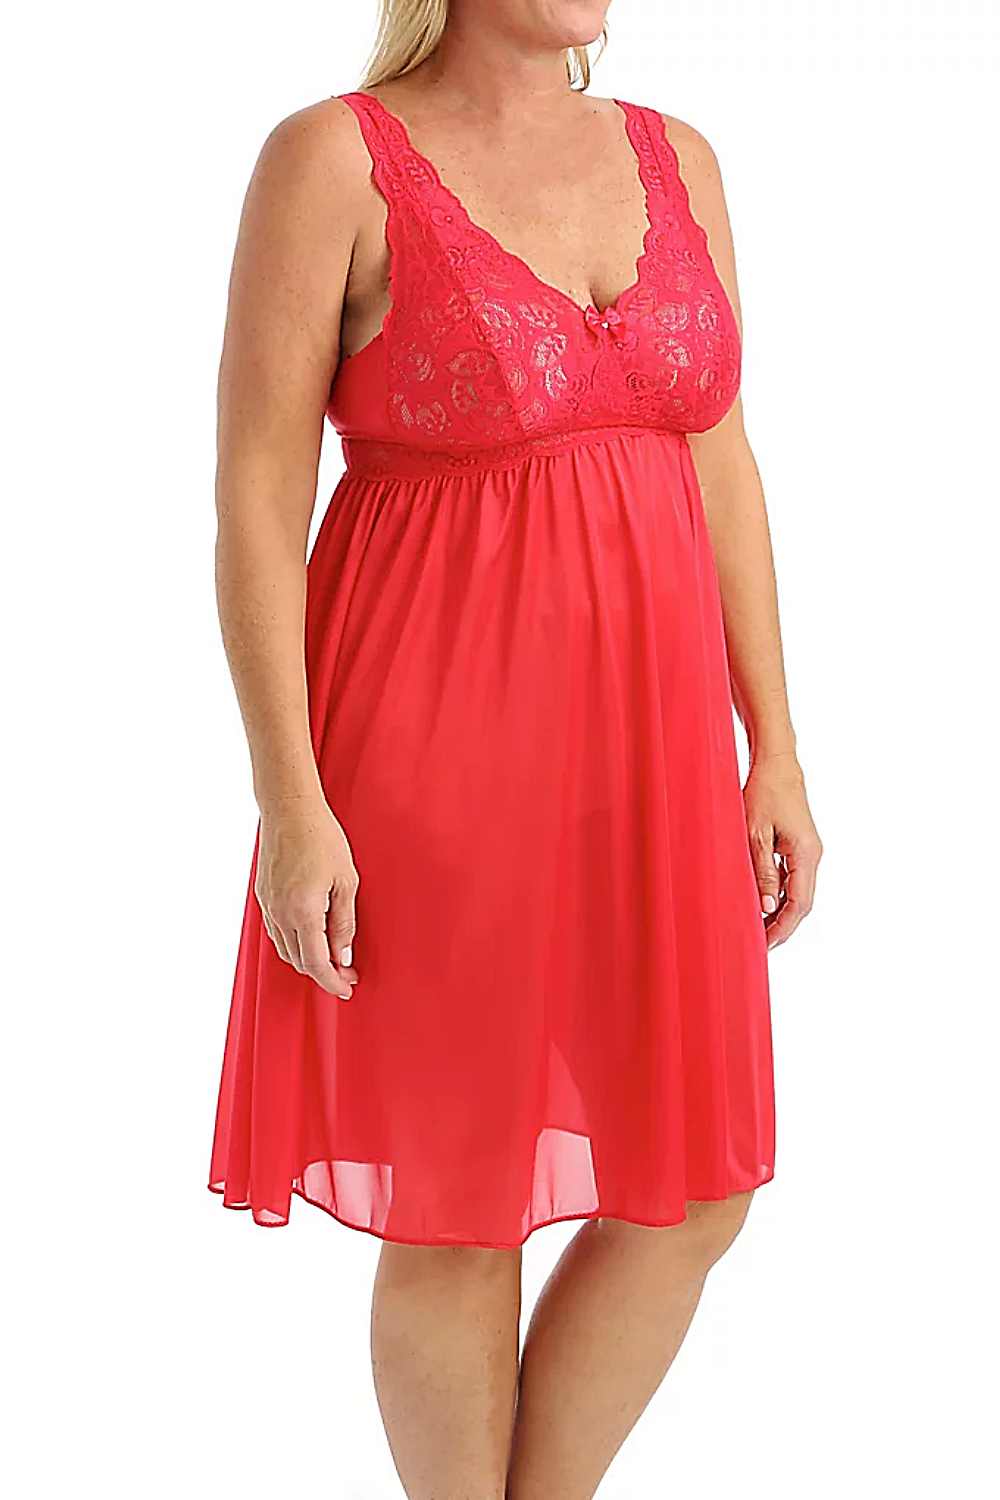 Women's Plus Size Matte Satin Nightgown With Lace #6063X –  shirleymccoycouture